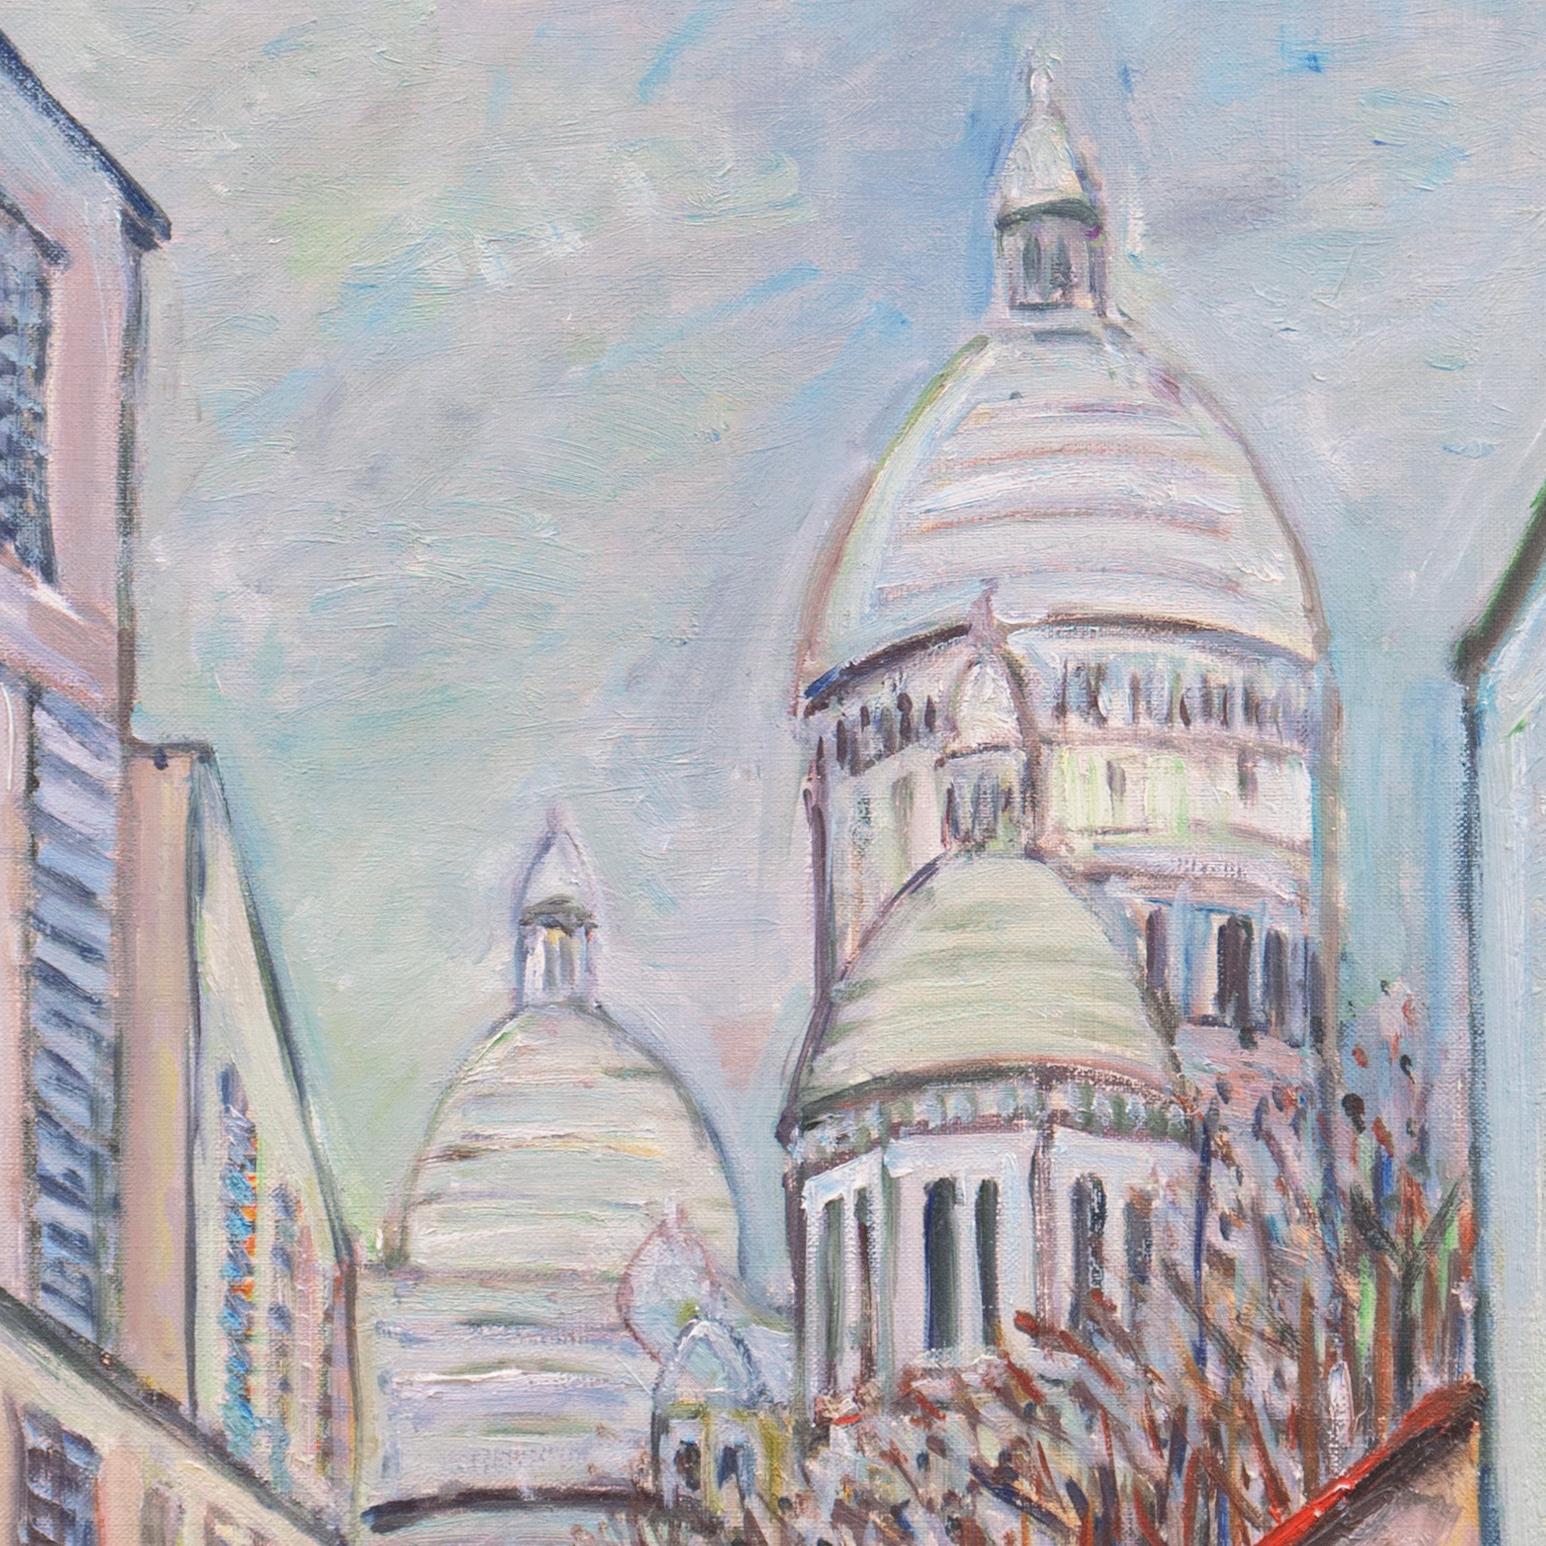 Signed lower right, 'K. H. Kaneko'; additionally inscribed, verso, 'K. H. Kaneko' and dated 1946 

A substantial, Post-Impressionist oil on canvas showing a view of Montmartre looking towards the Basilica of Sacré-Cœur.